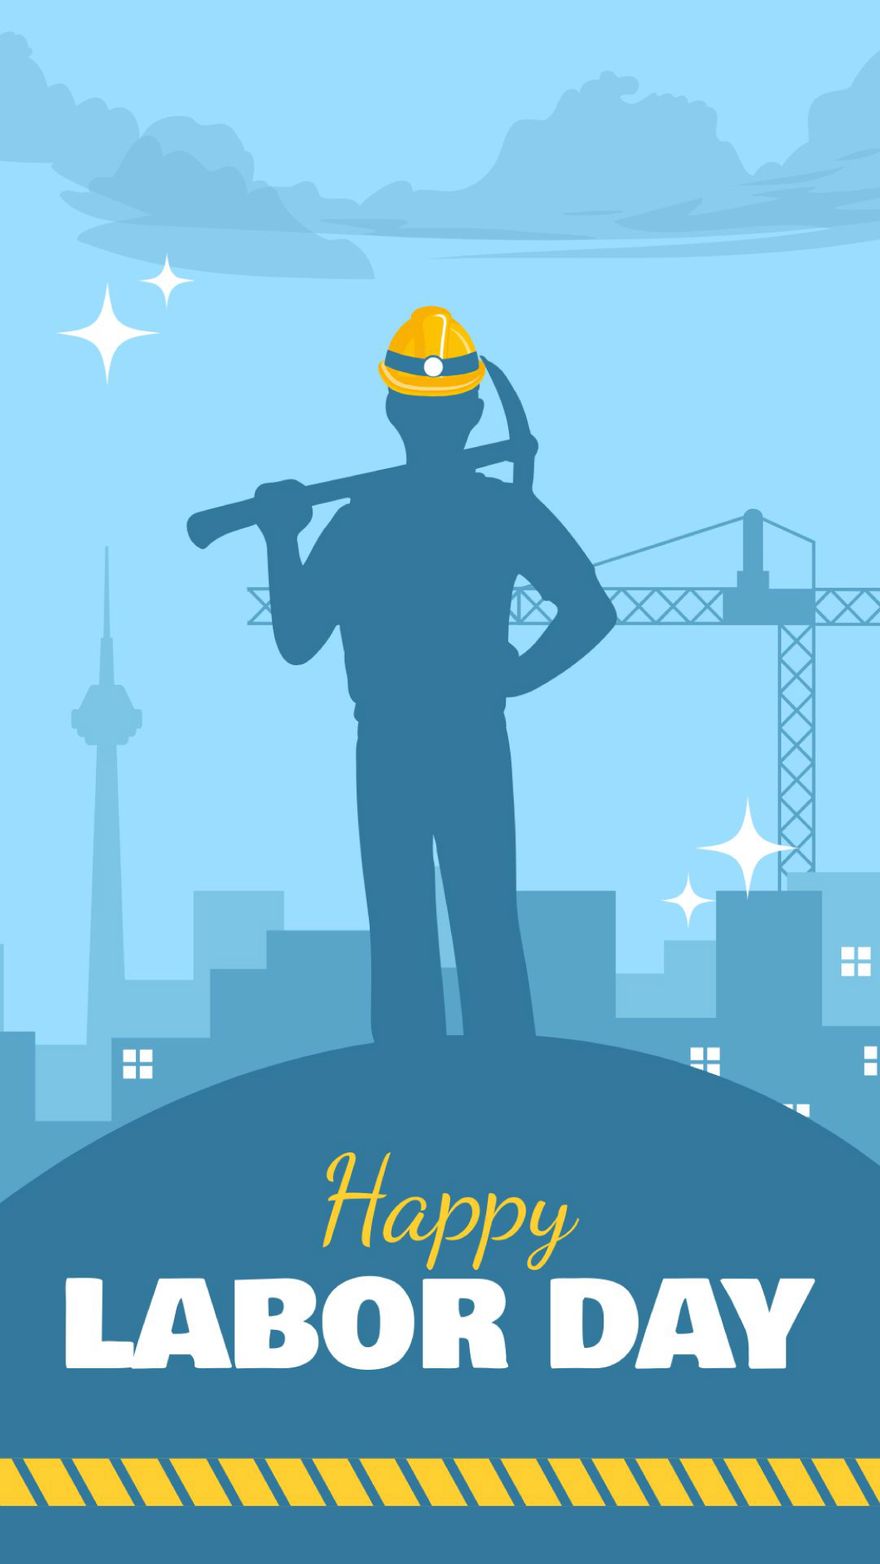 Free Labor Day iPhone Background in PDF, Illustrator, PSD, EPS, SVG, JPG, PNG